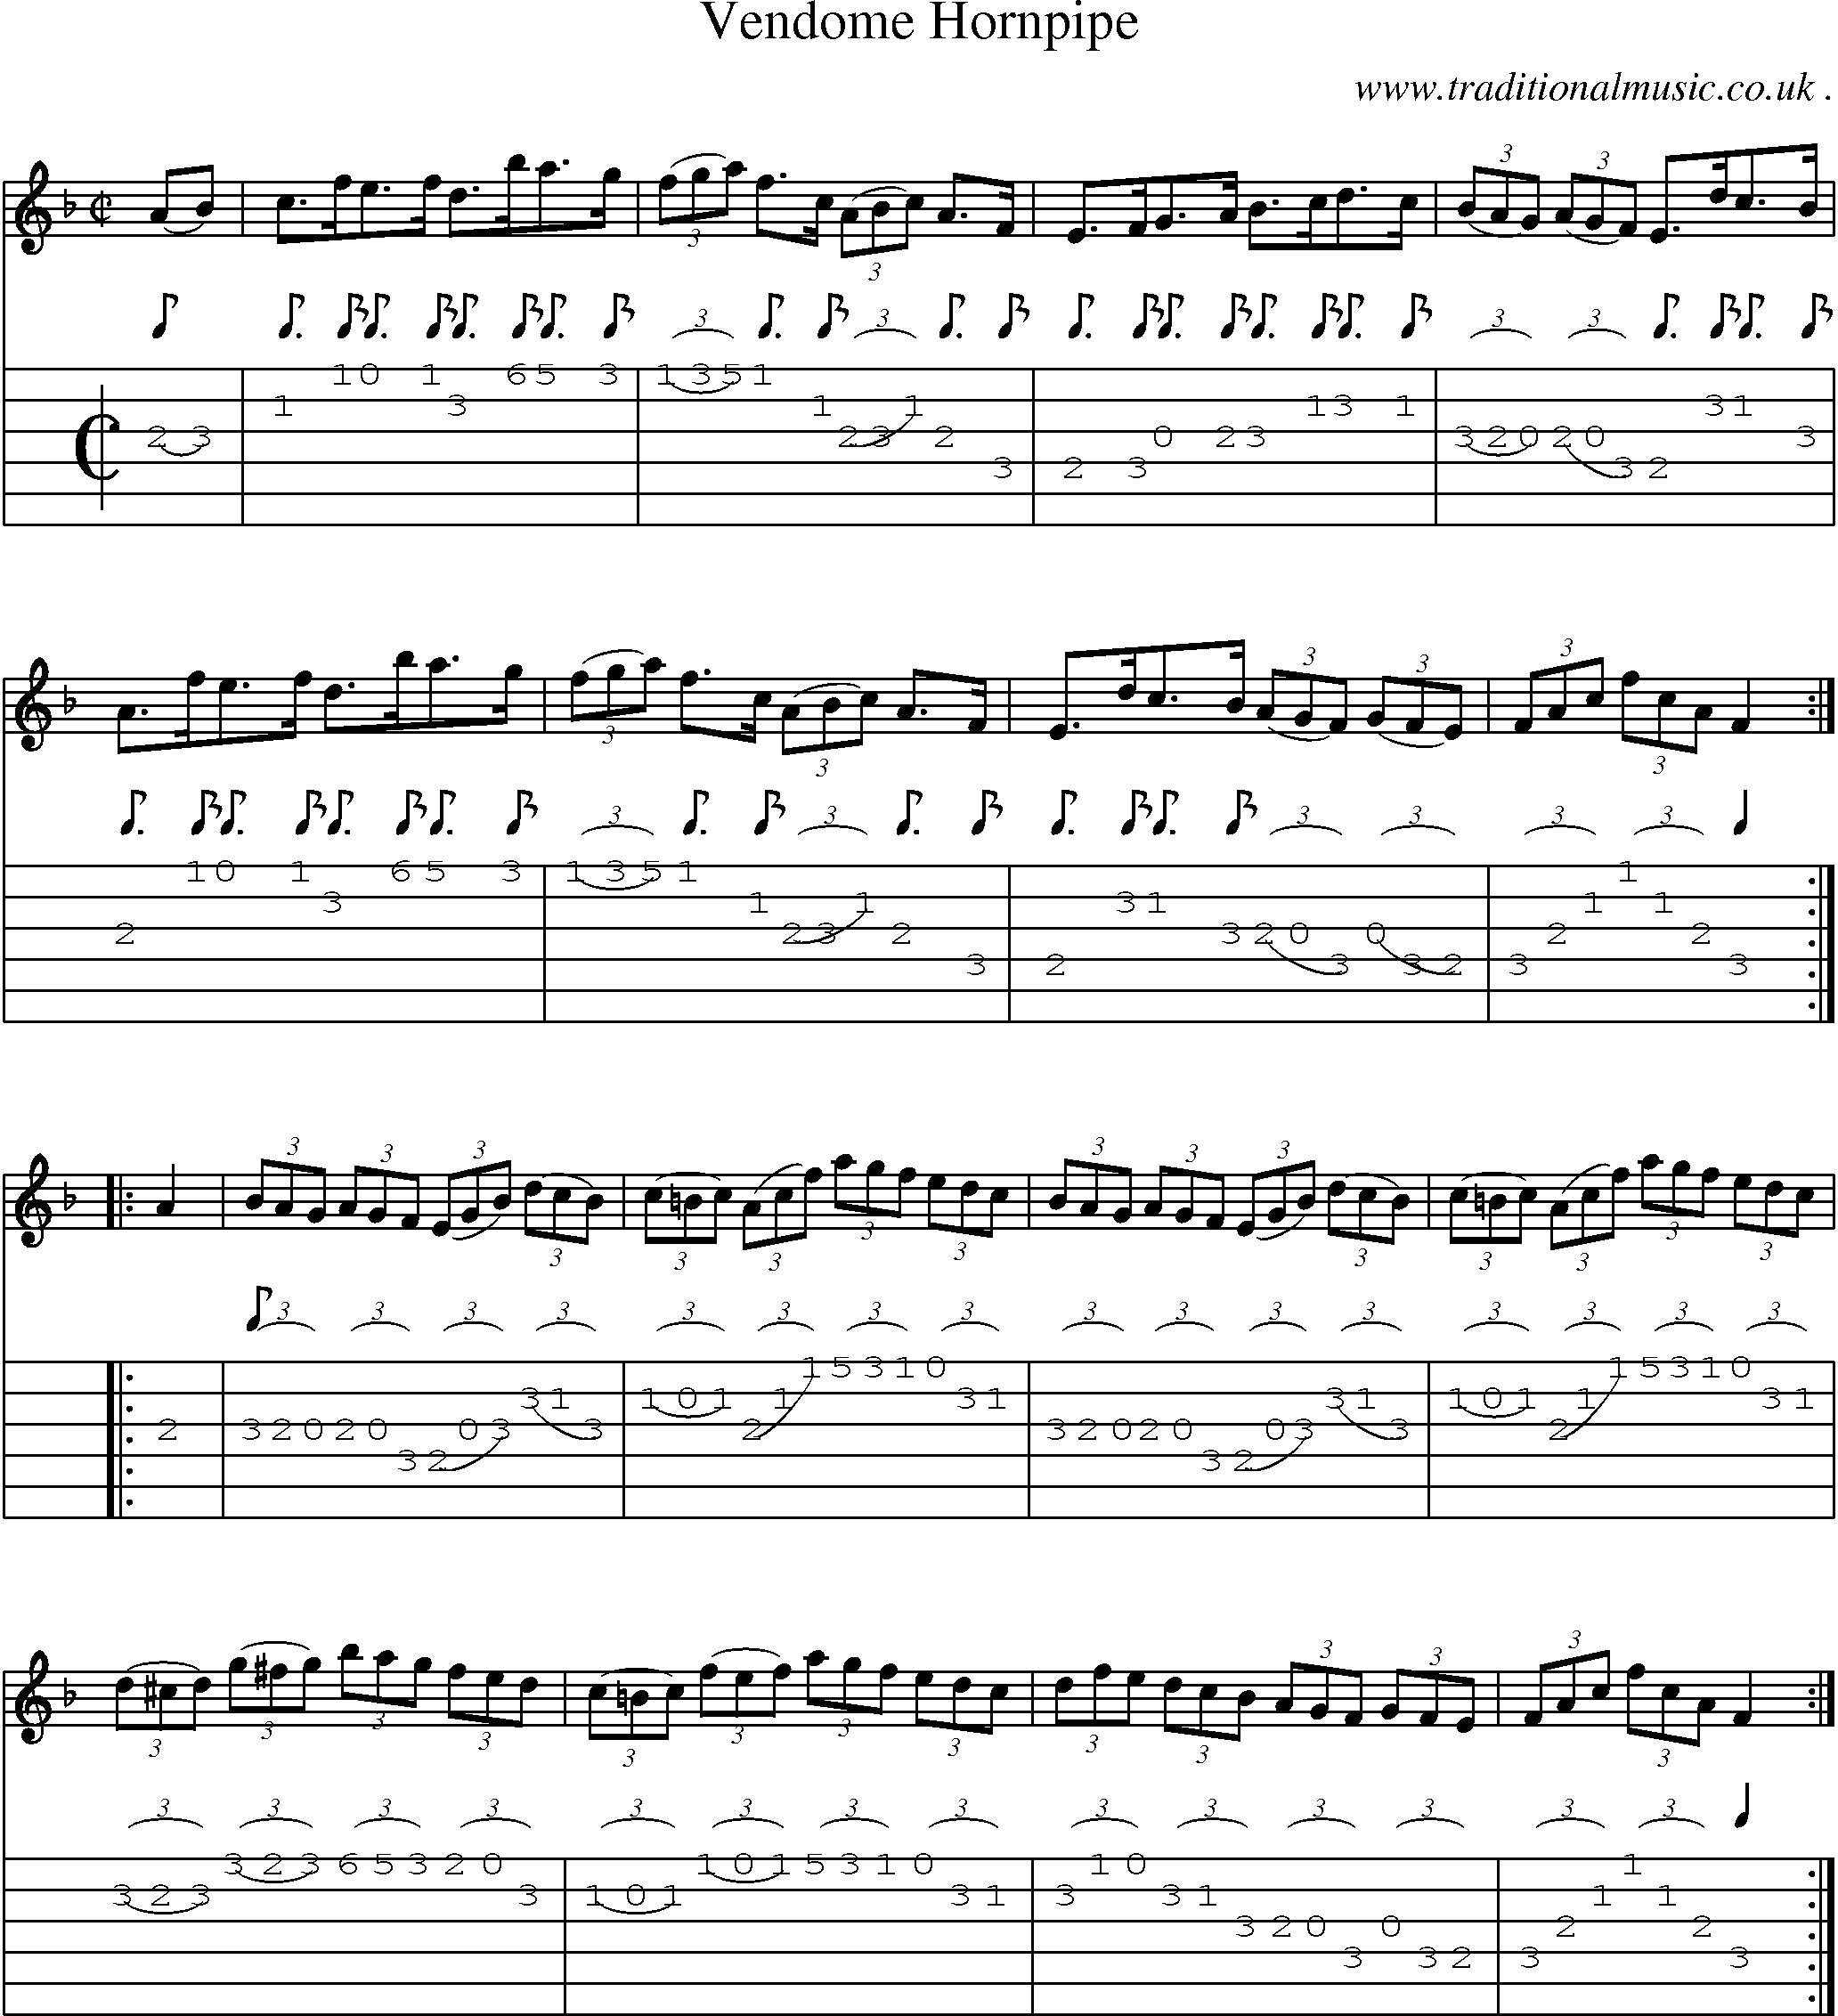 Sheet-Music and Guitar Tabs for Vendome Hornpipe